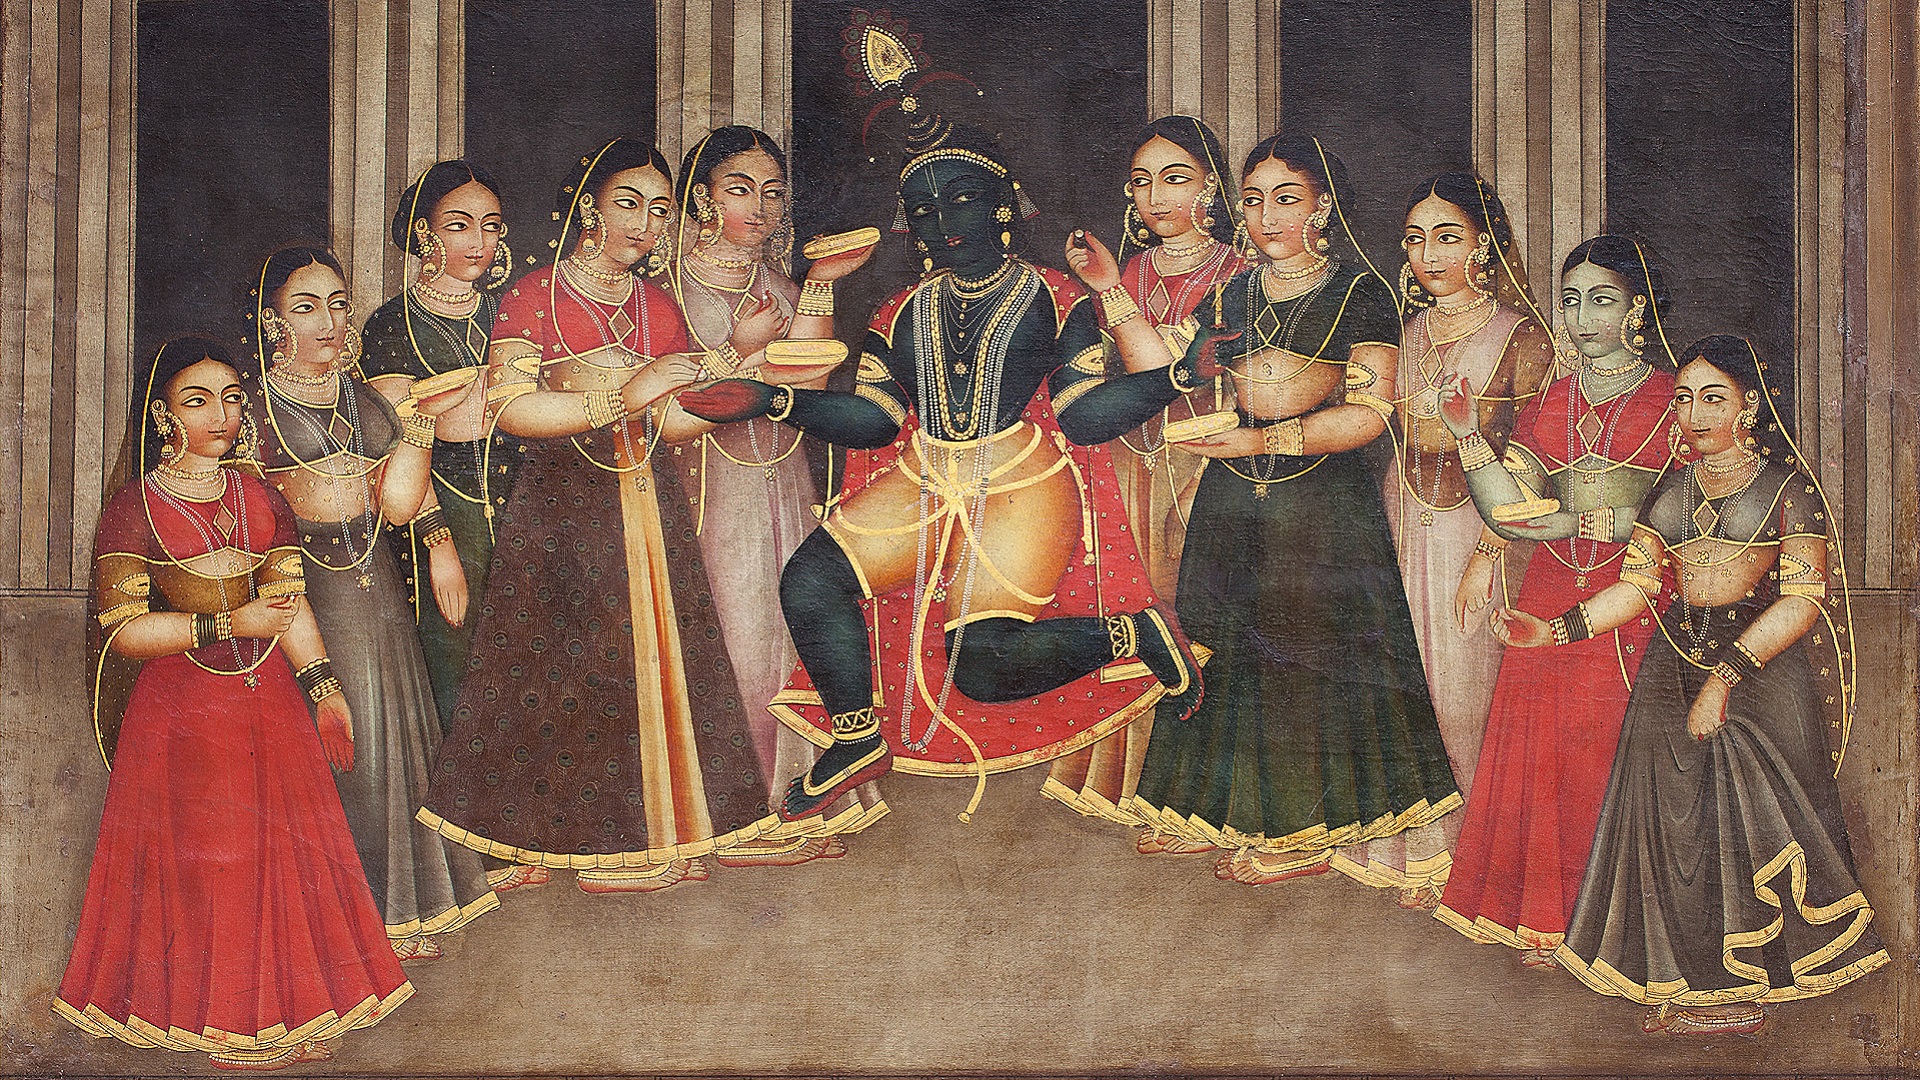 The Babu and the Bazaar: Art from 19th and Early 20th Century Bengal - DAG World